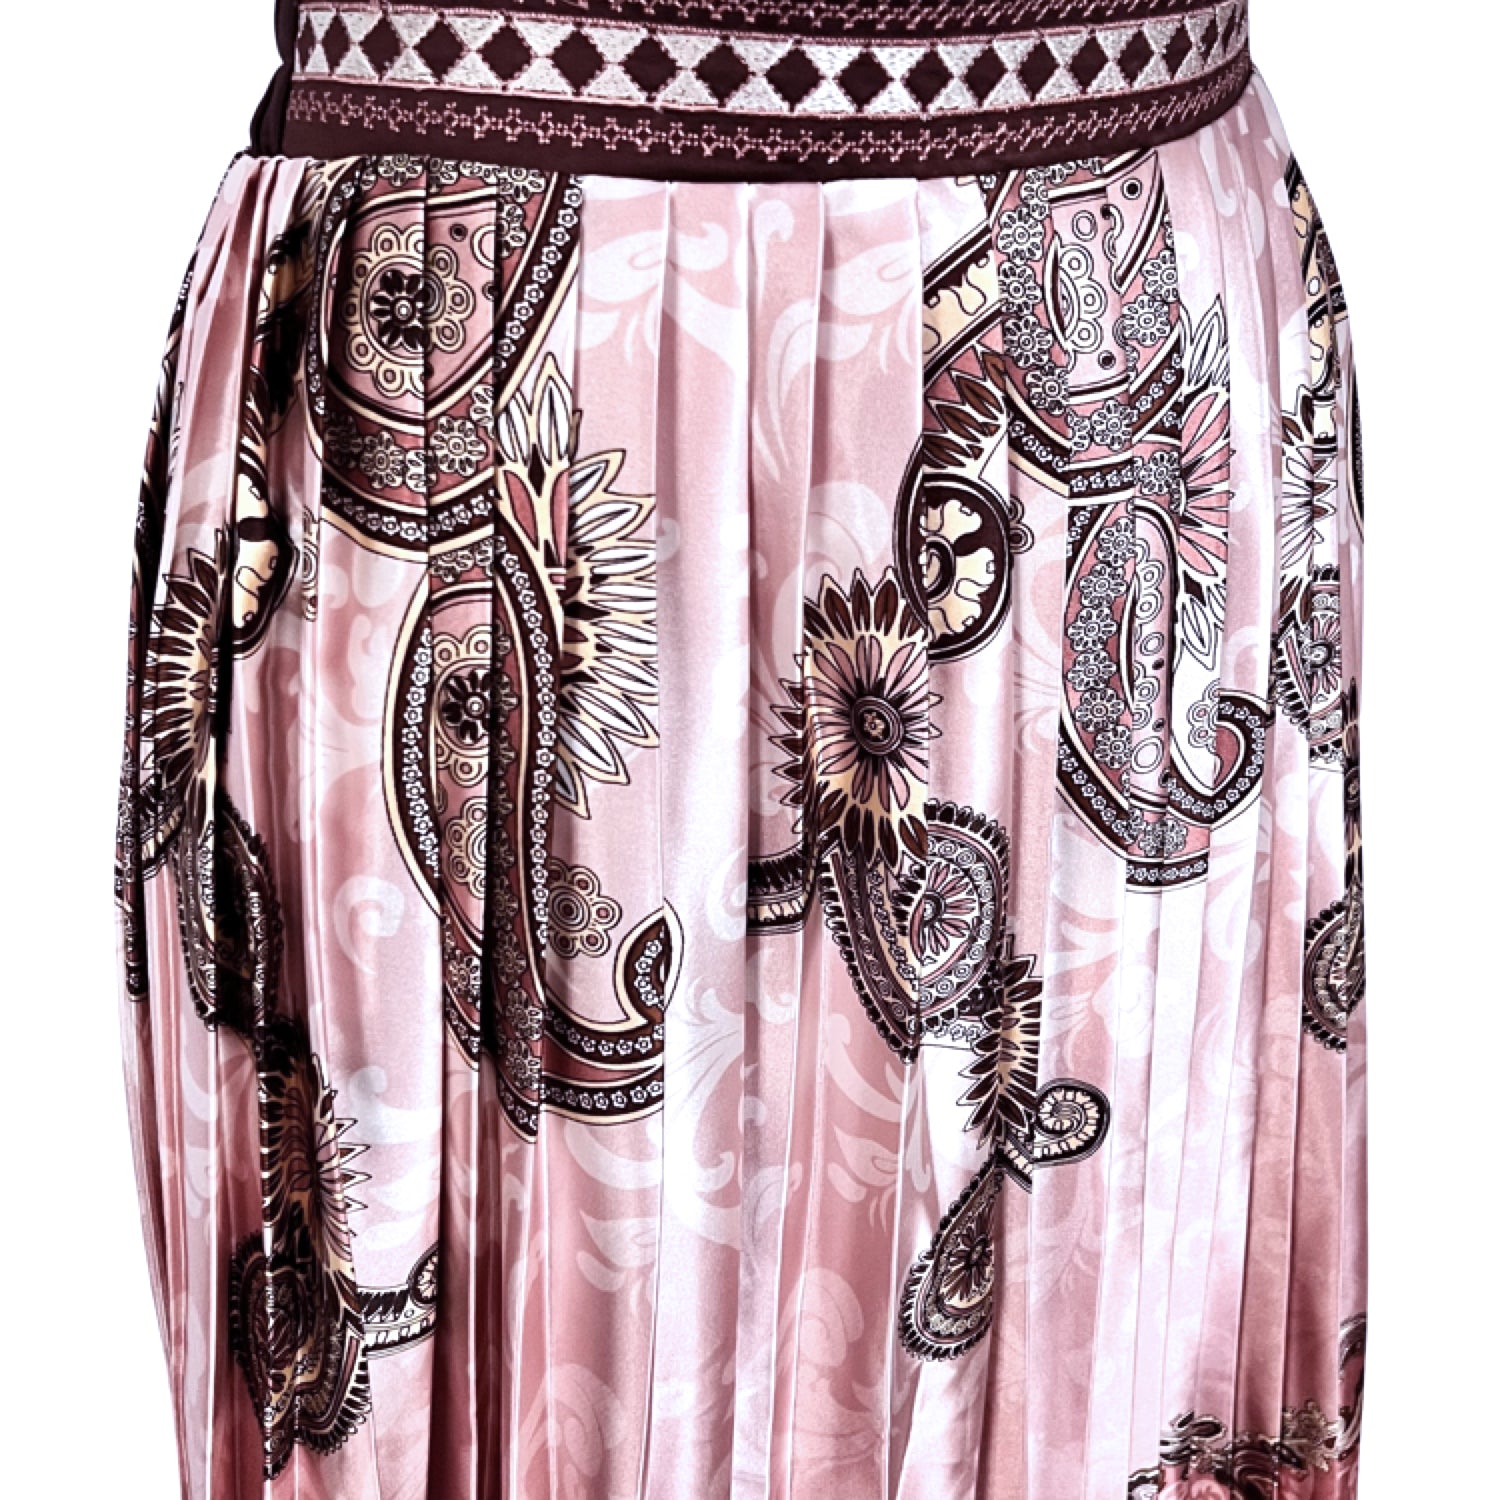 Embroidered Pleated Scarf Midi Skirt in Pink & White